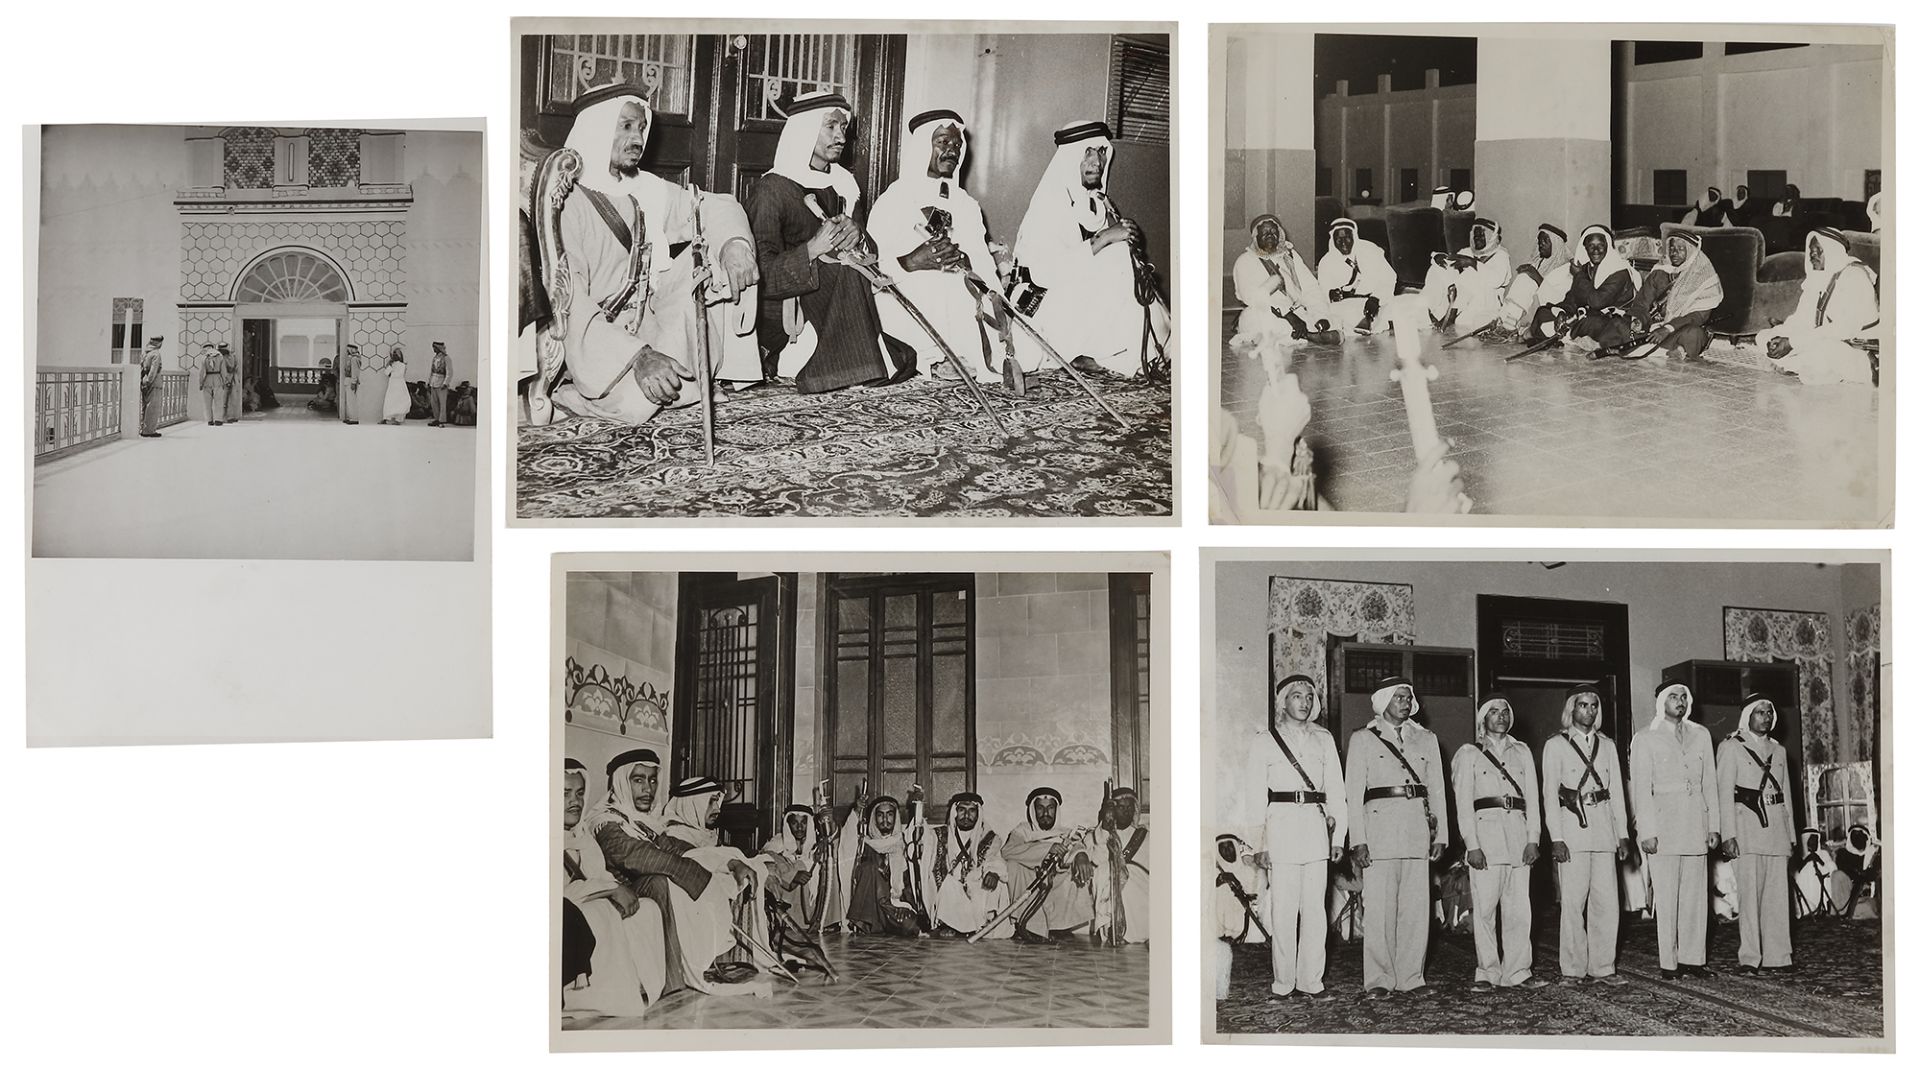 FIVE PHOTOGRAPHS OF AL-SAUD ROYAL GUARDS WITH THEIR TRADITIONAL WEAPONS AND UNIFORMS, DURING DUTY AT